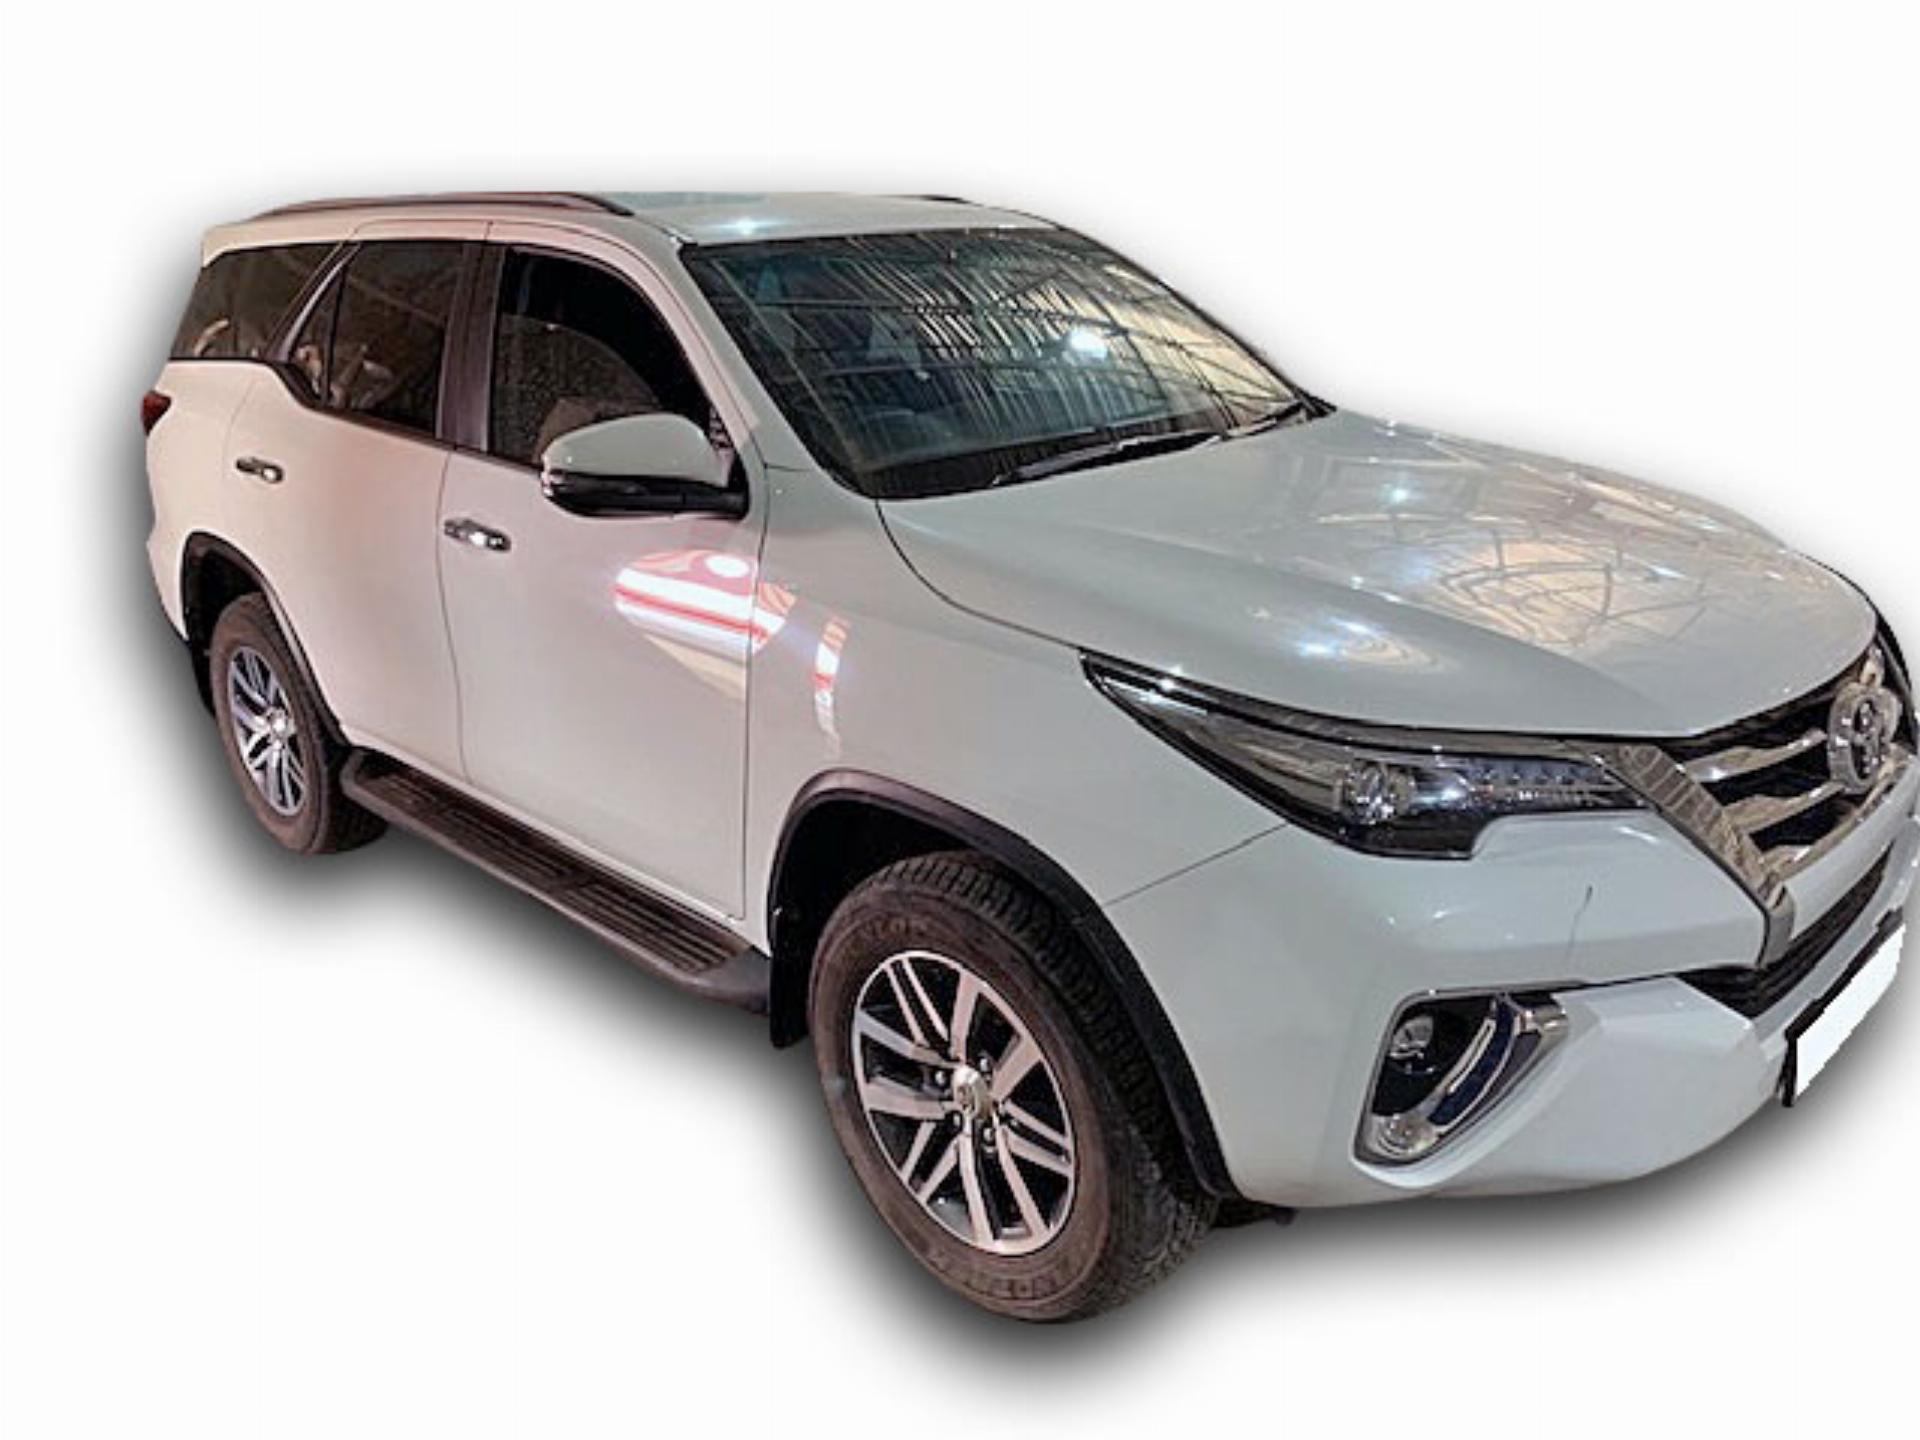 Toyota Fortuner 2.8GD-6 4X4